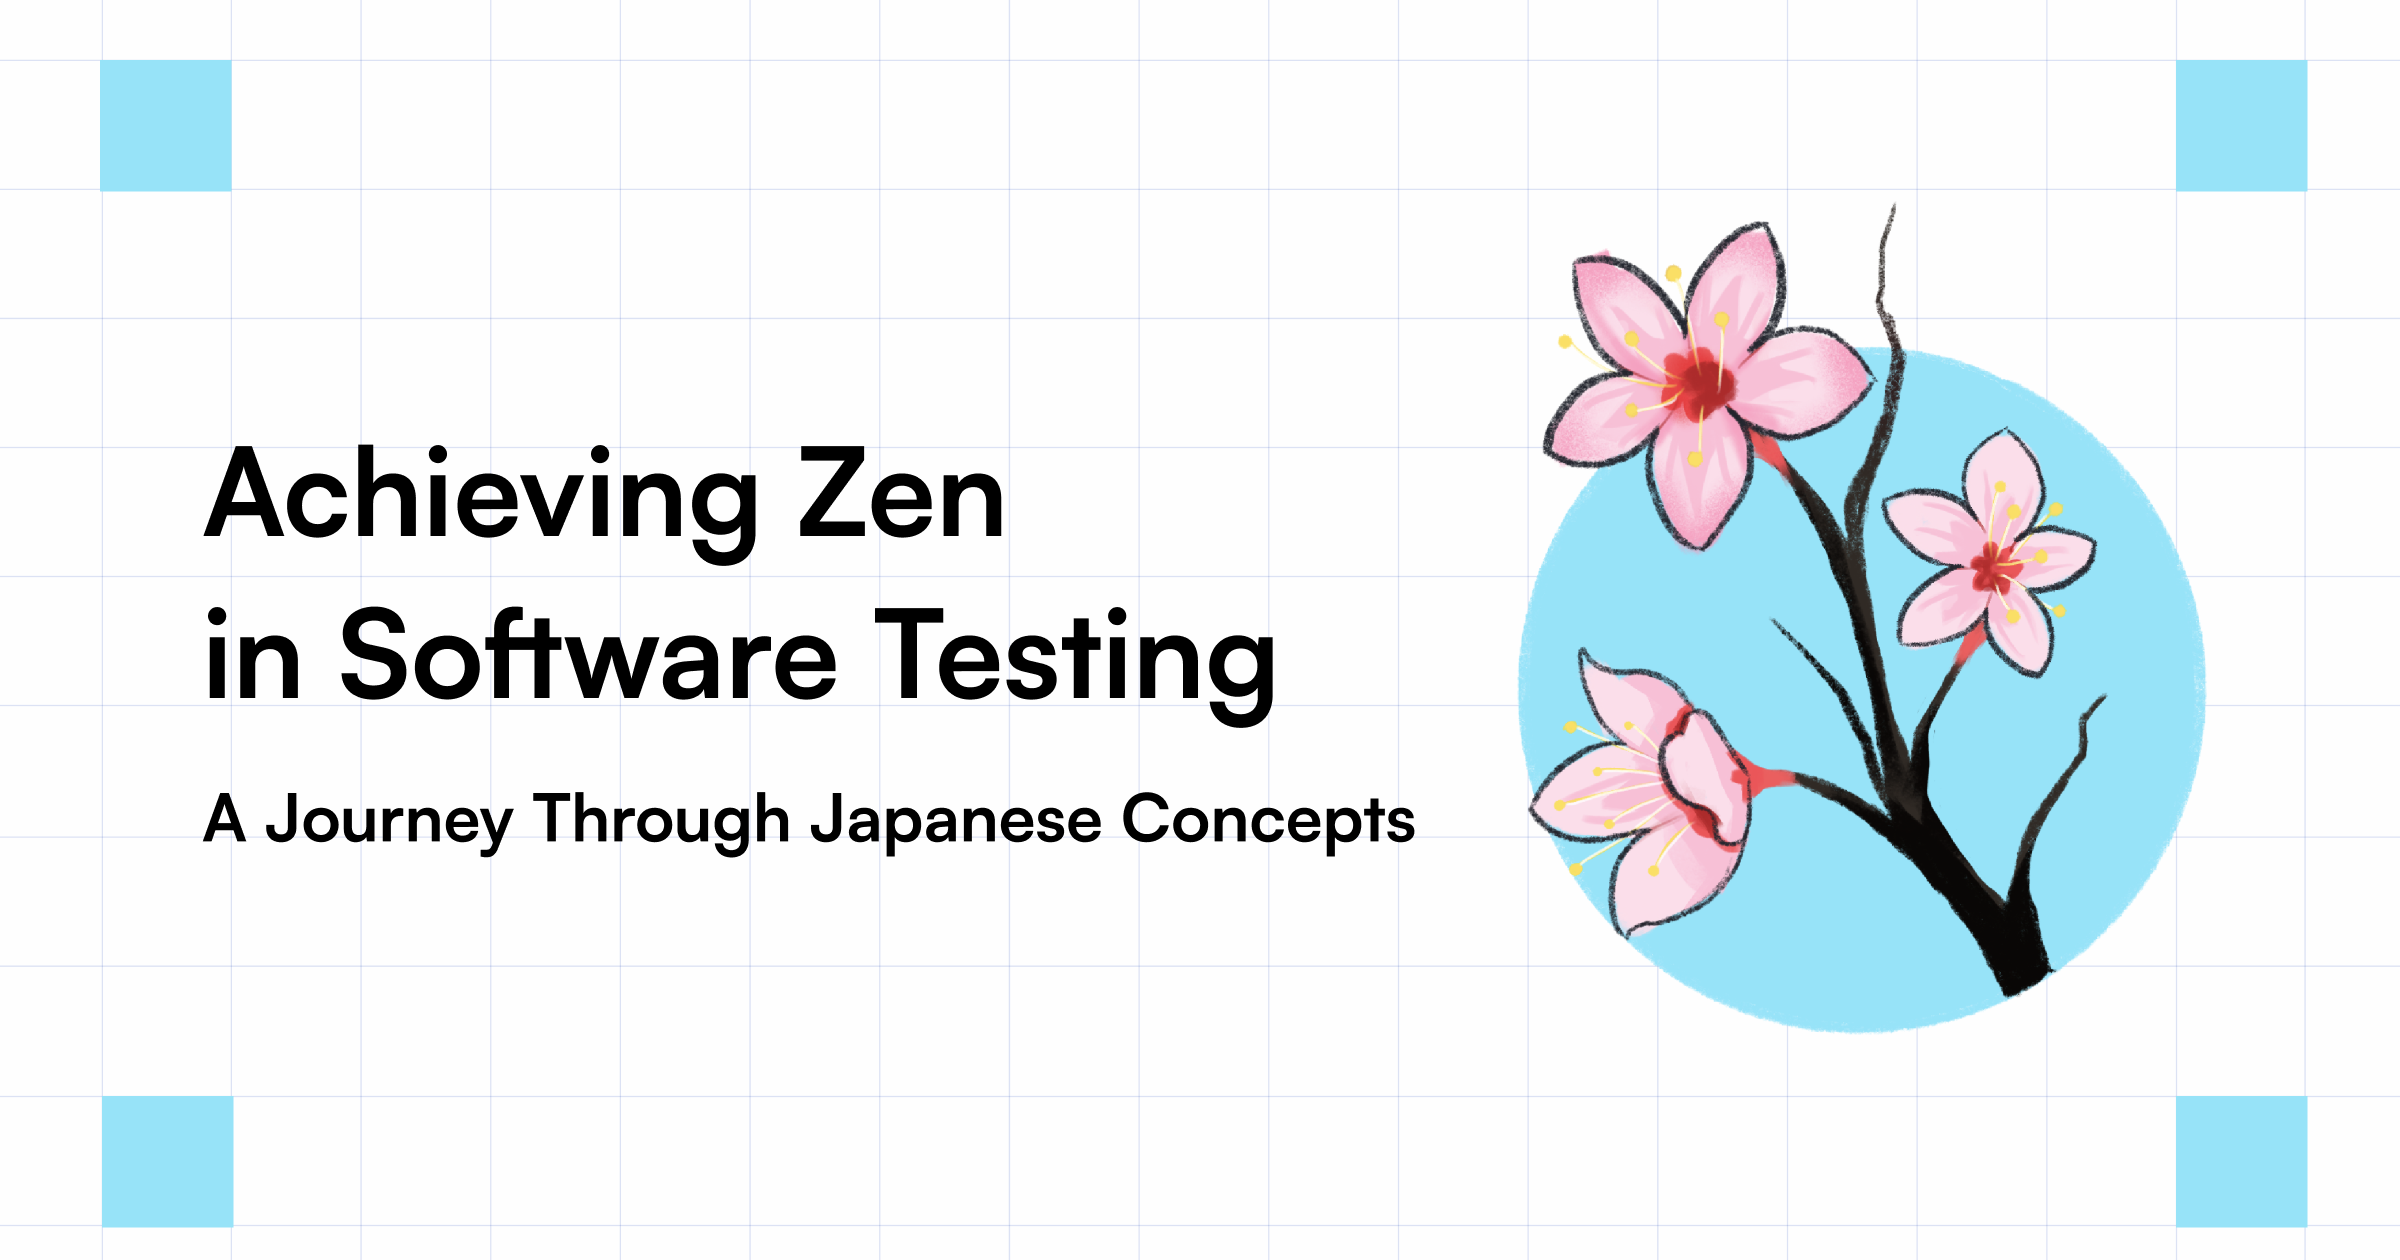 Achieving Zen in Software Testing: A Journey Through Japanese Concepts